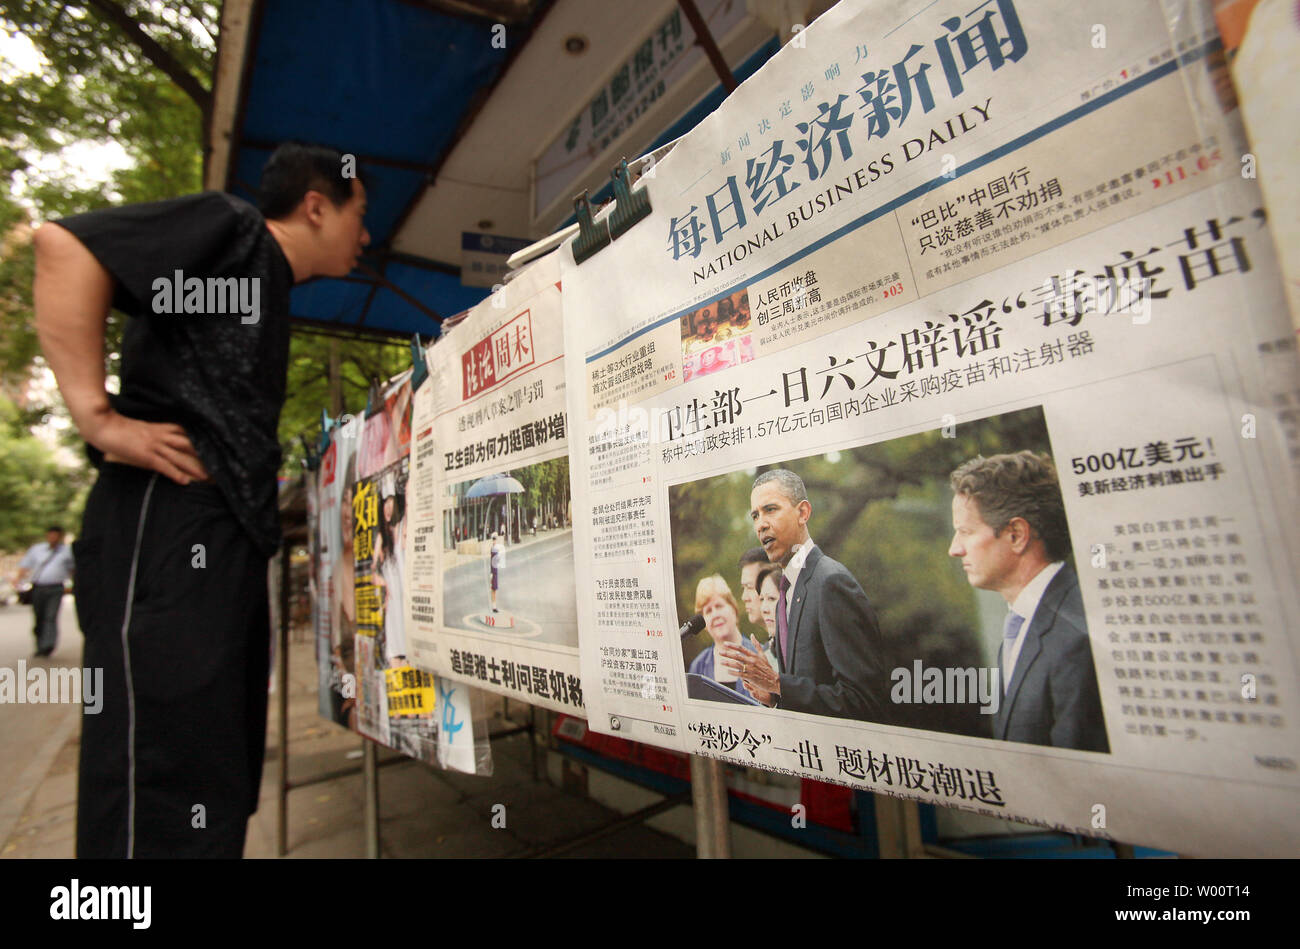 A Chinese man looks at the latest magazines and newspapers on sale at a news kiosk, featuring a government newspaper with a front page article on U.S. President Barack Obama, in Beijing, September 9, 2010.    UPI/Stephen Shaver Stock Photo